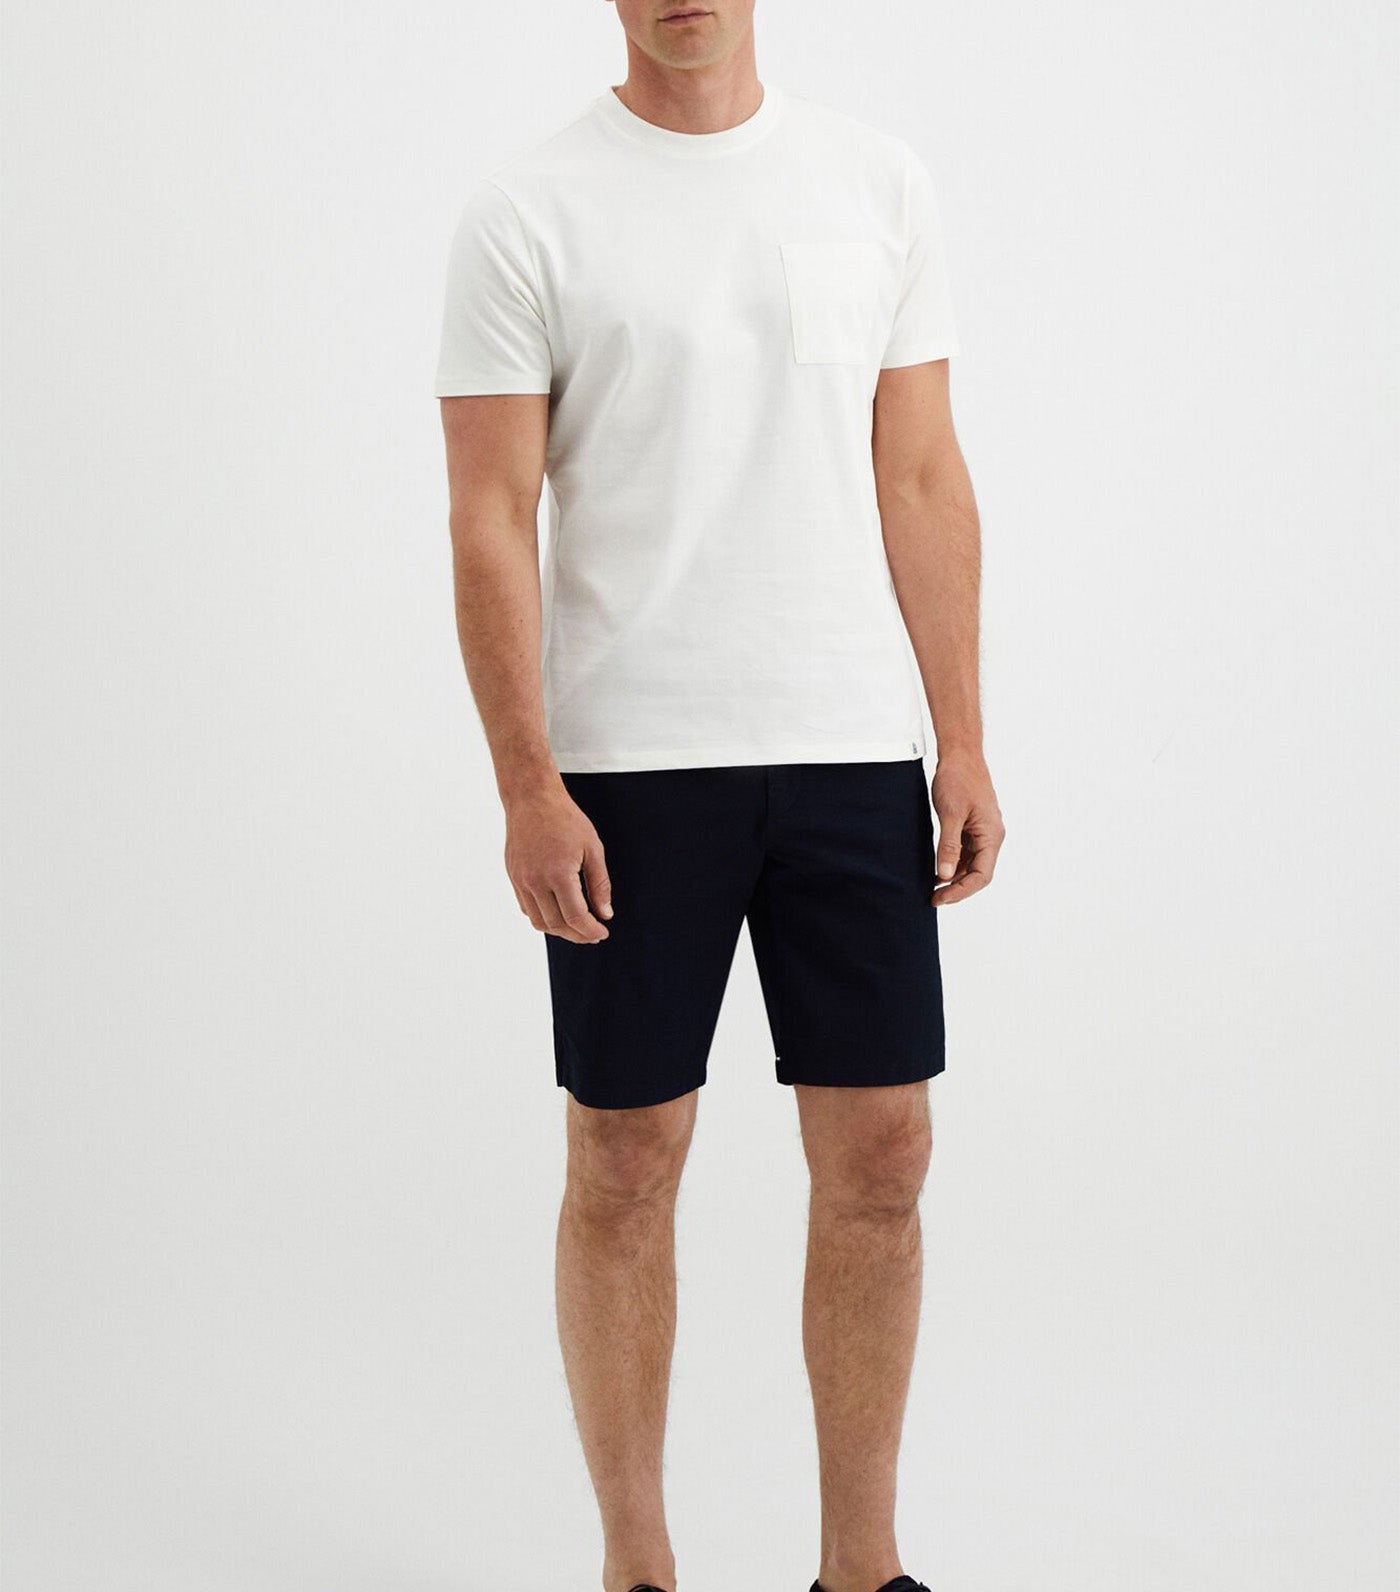 Crew Neck T-shirt with Pocket White